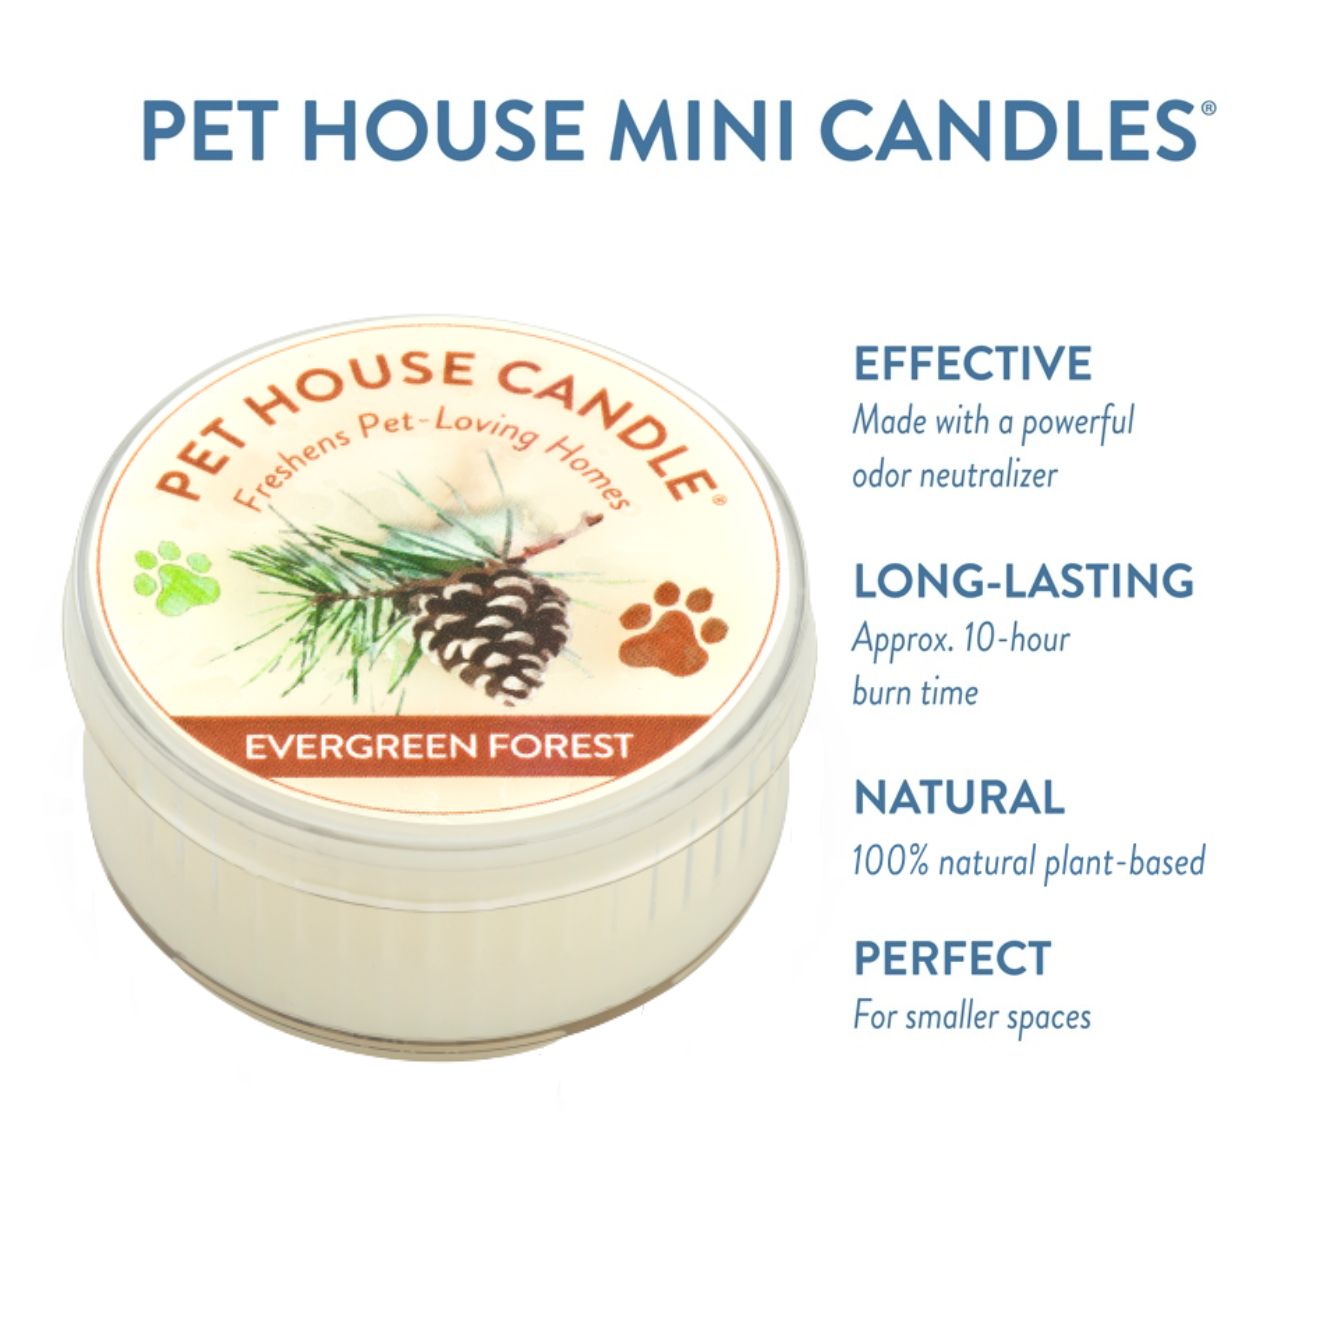 Evergreen Forest Mini Candle infographics